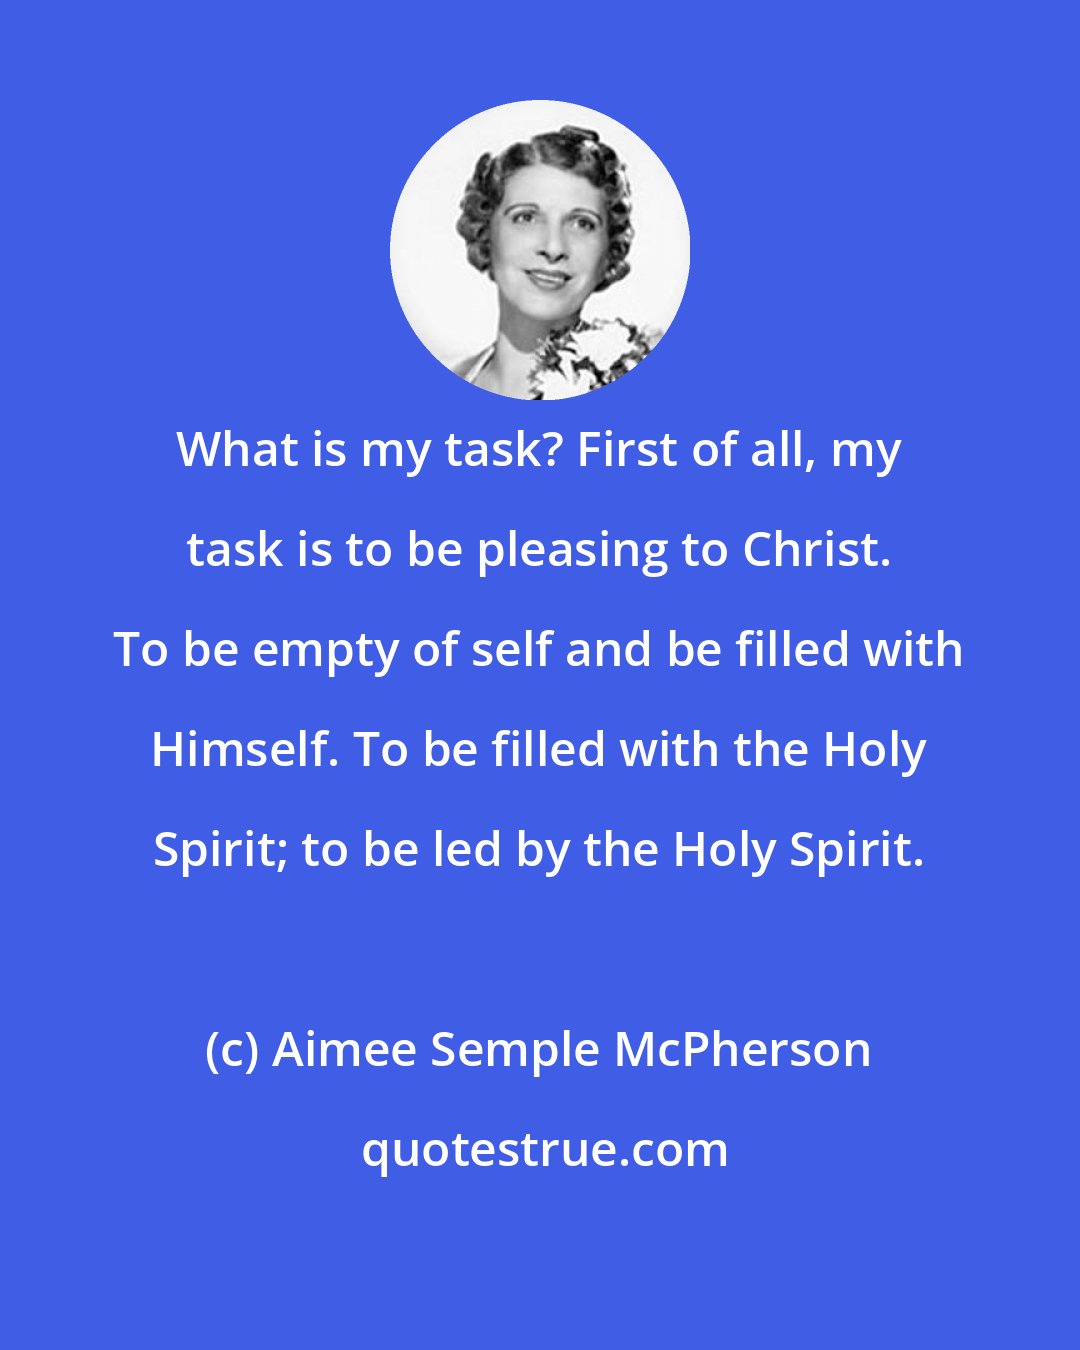 Aimee Semple McPherson: What is my task? First of all, my task is to be pleasing to Christ. To be empty of self and be filled with Himself. To be filled with the Holy Spirit; to be led by the Holy Spirit.